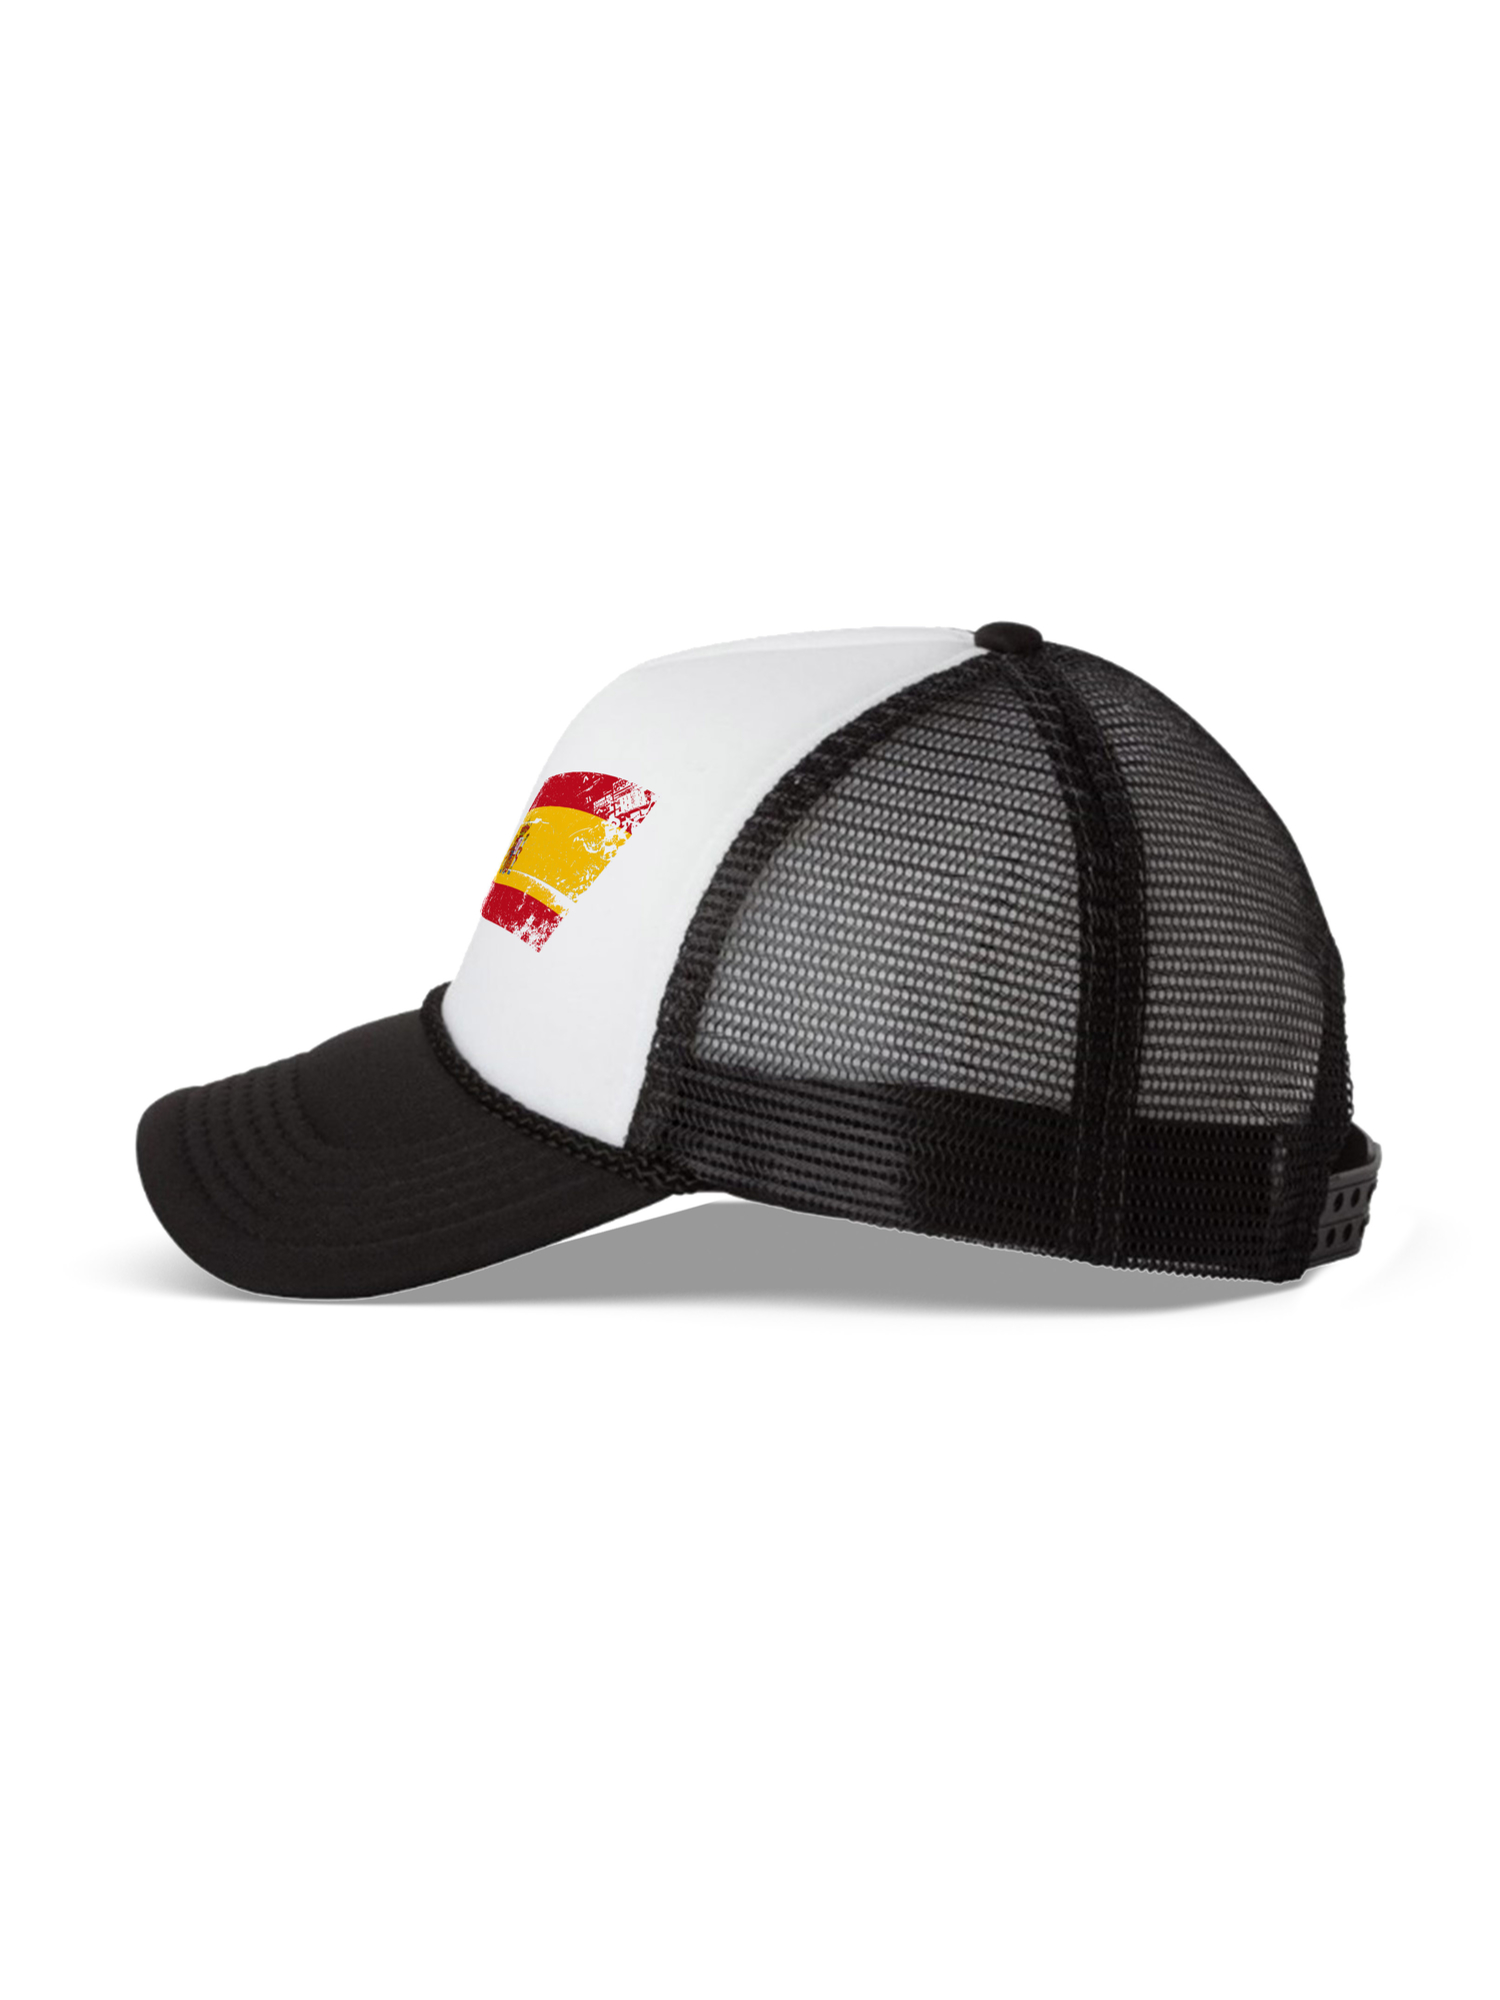 Awkward Styles Spain Flag Hat Spanish Trucker Hat Spain Baseball Cap Amazing Gifts from Spain Spanish Soccer 2018 Hat Spain 2018 Hat for Men and Women Spanish Flag Snapback Hats Spain Gifts - image 3 of 6